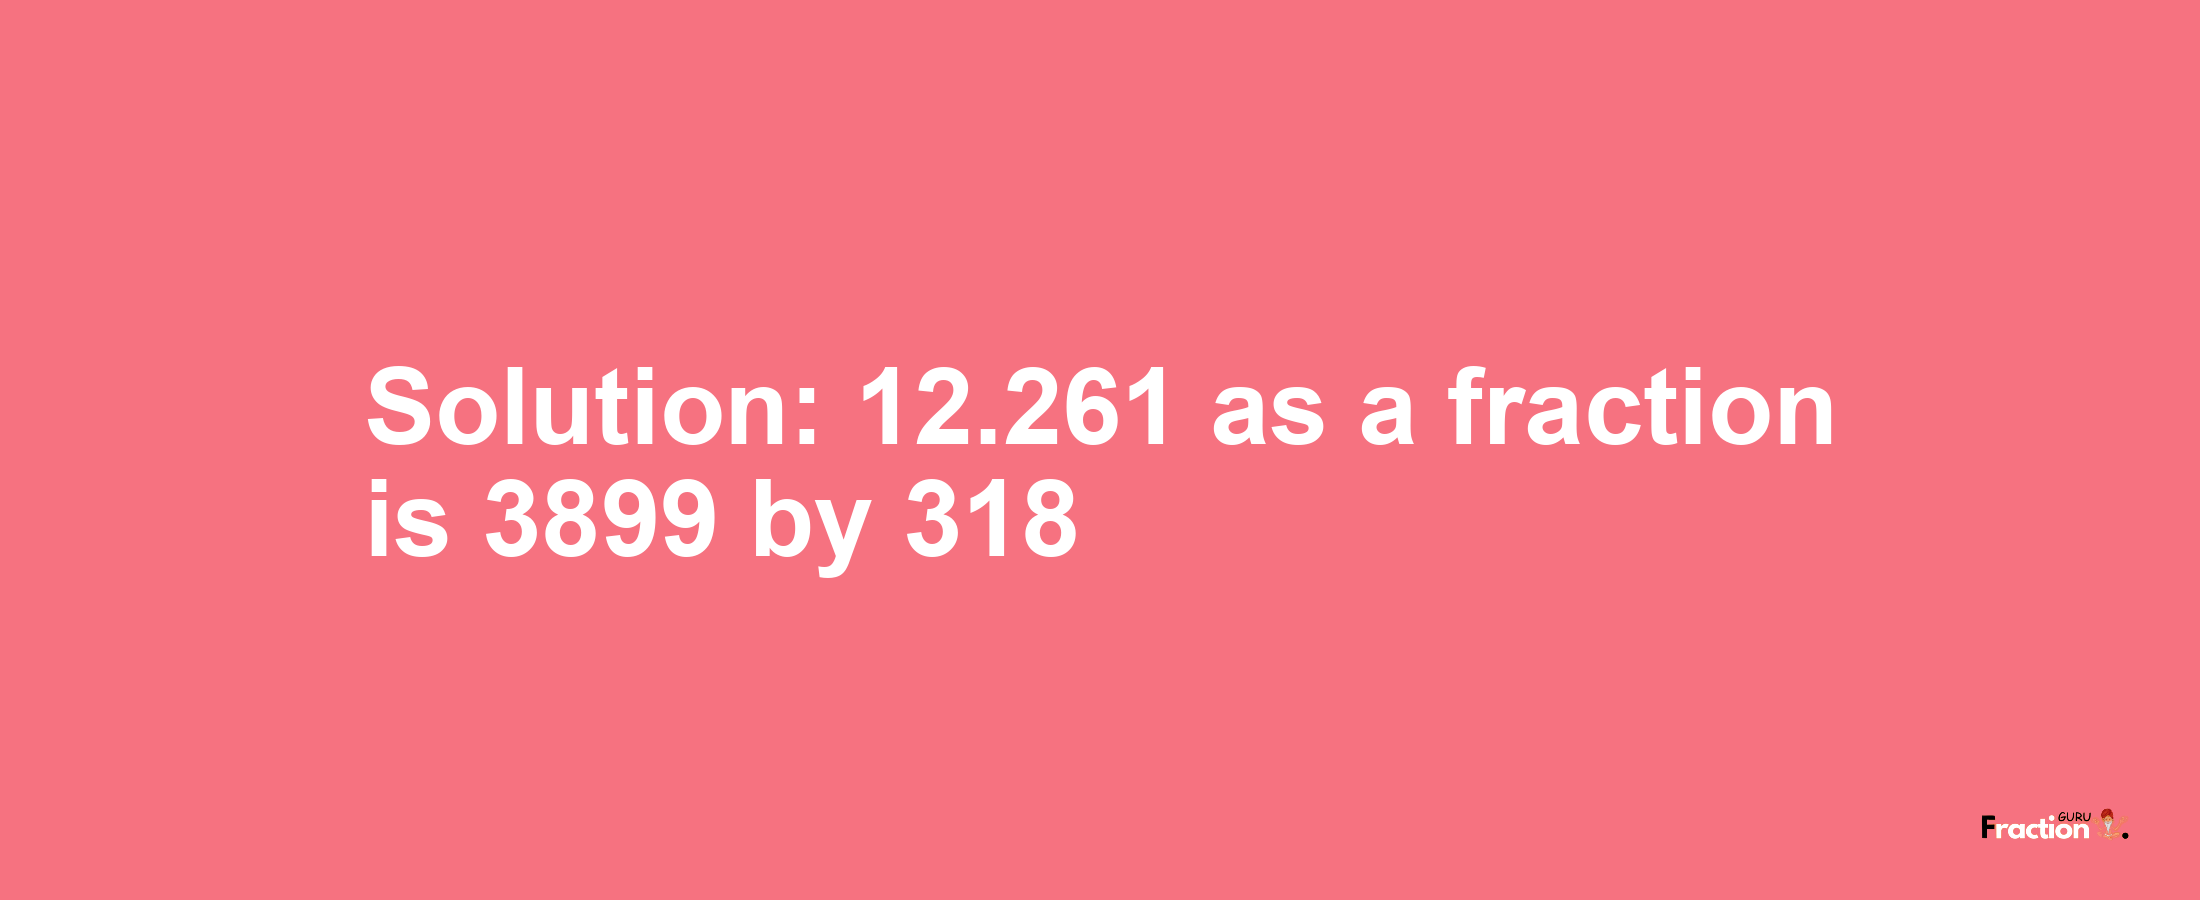 Solution:12.261 as a fraction is 3899/318